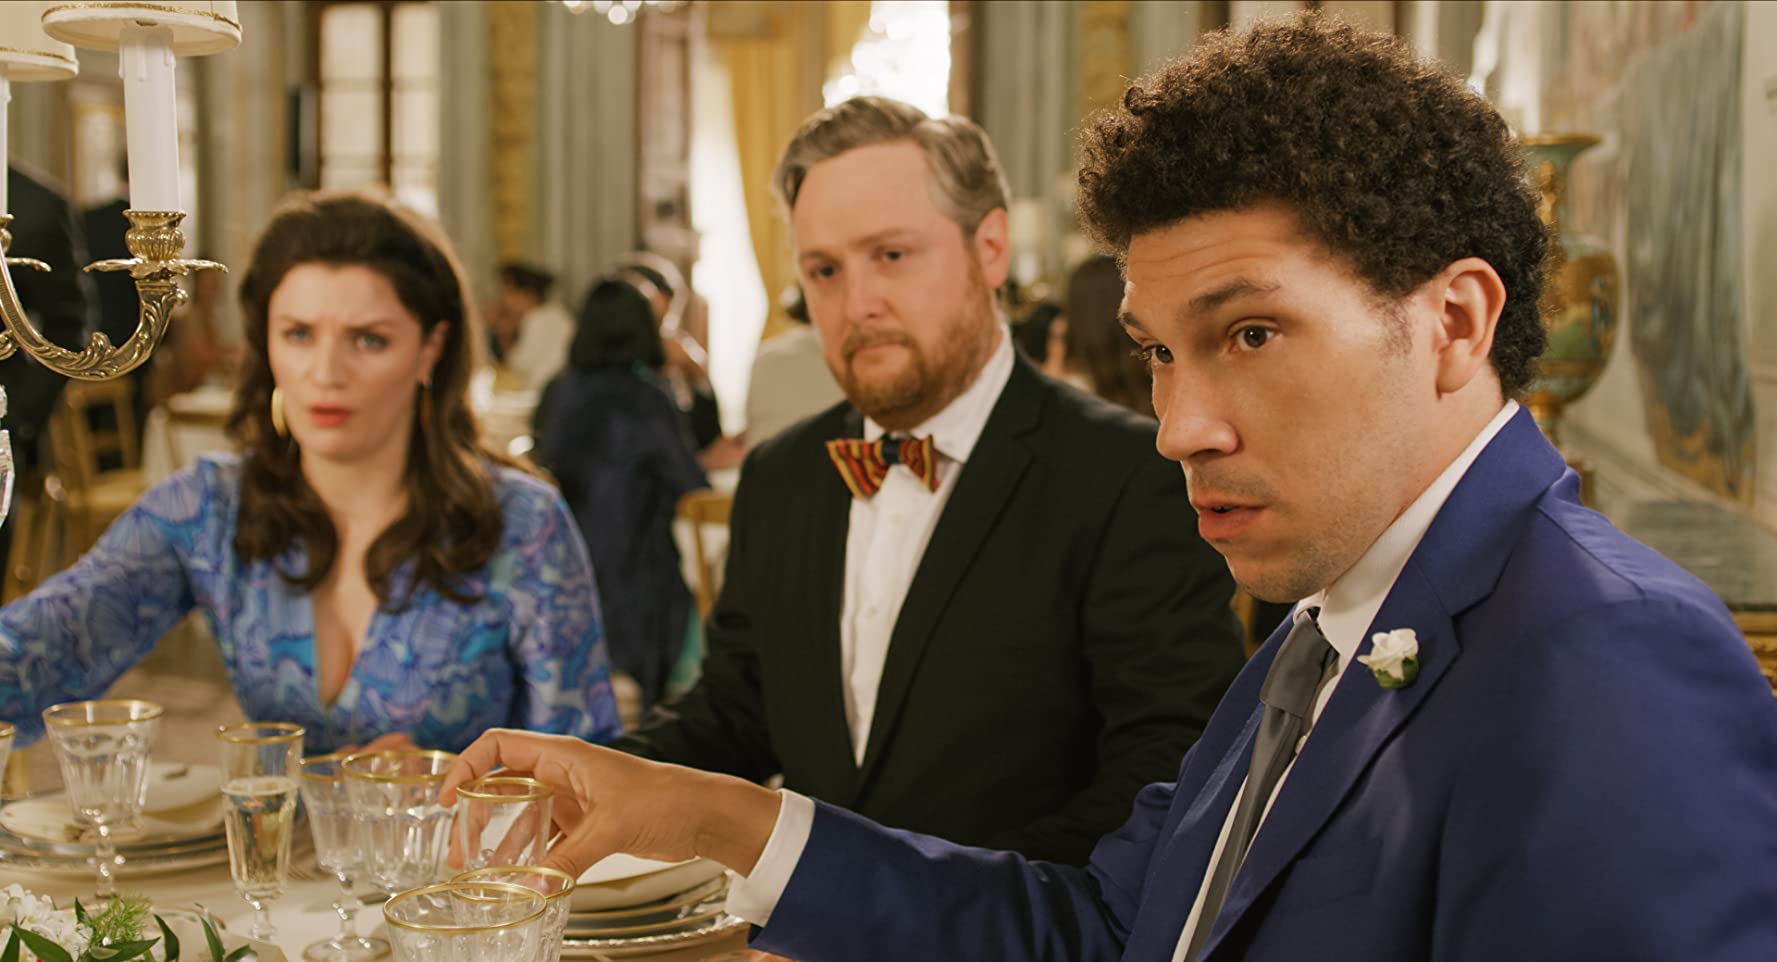 Aisling Bea, Tim Key and Joel Fry in Netflix's romantic comedy Love Wedding Repeat (2020)